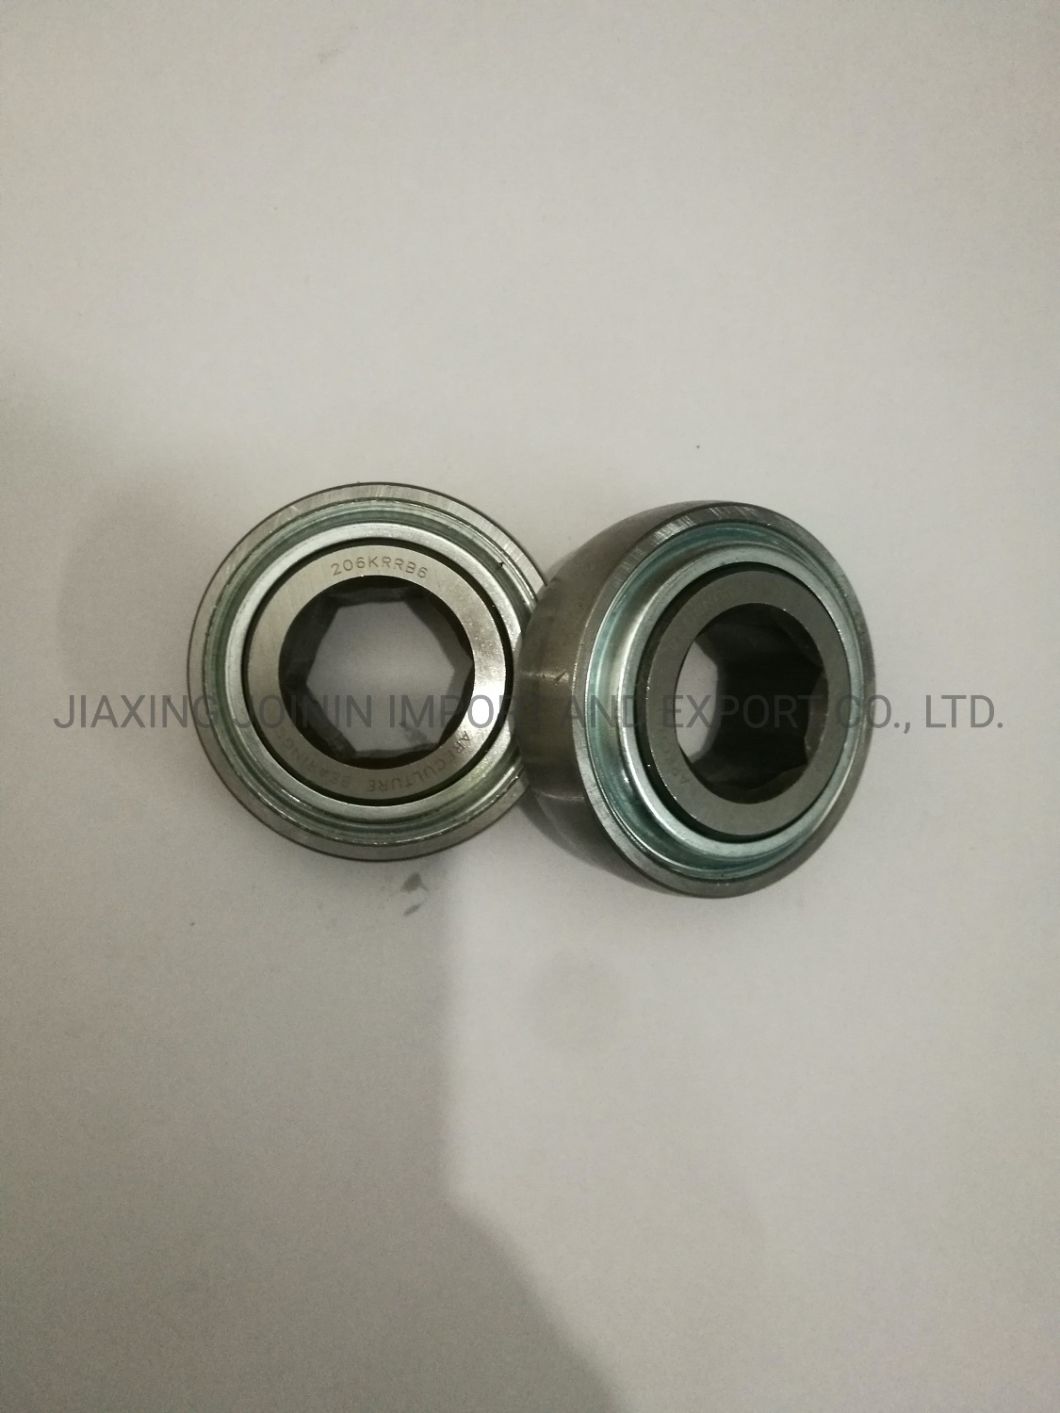 202krr3 Agricultural Machinery Bearing Heavy Duty Bearing Hex Socket Bore Bearing Non-Relubricable Farm Machinery Bearing